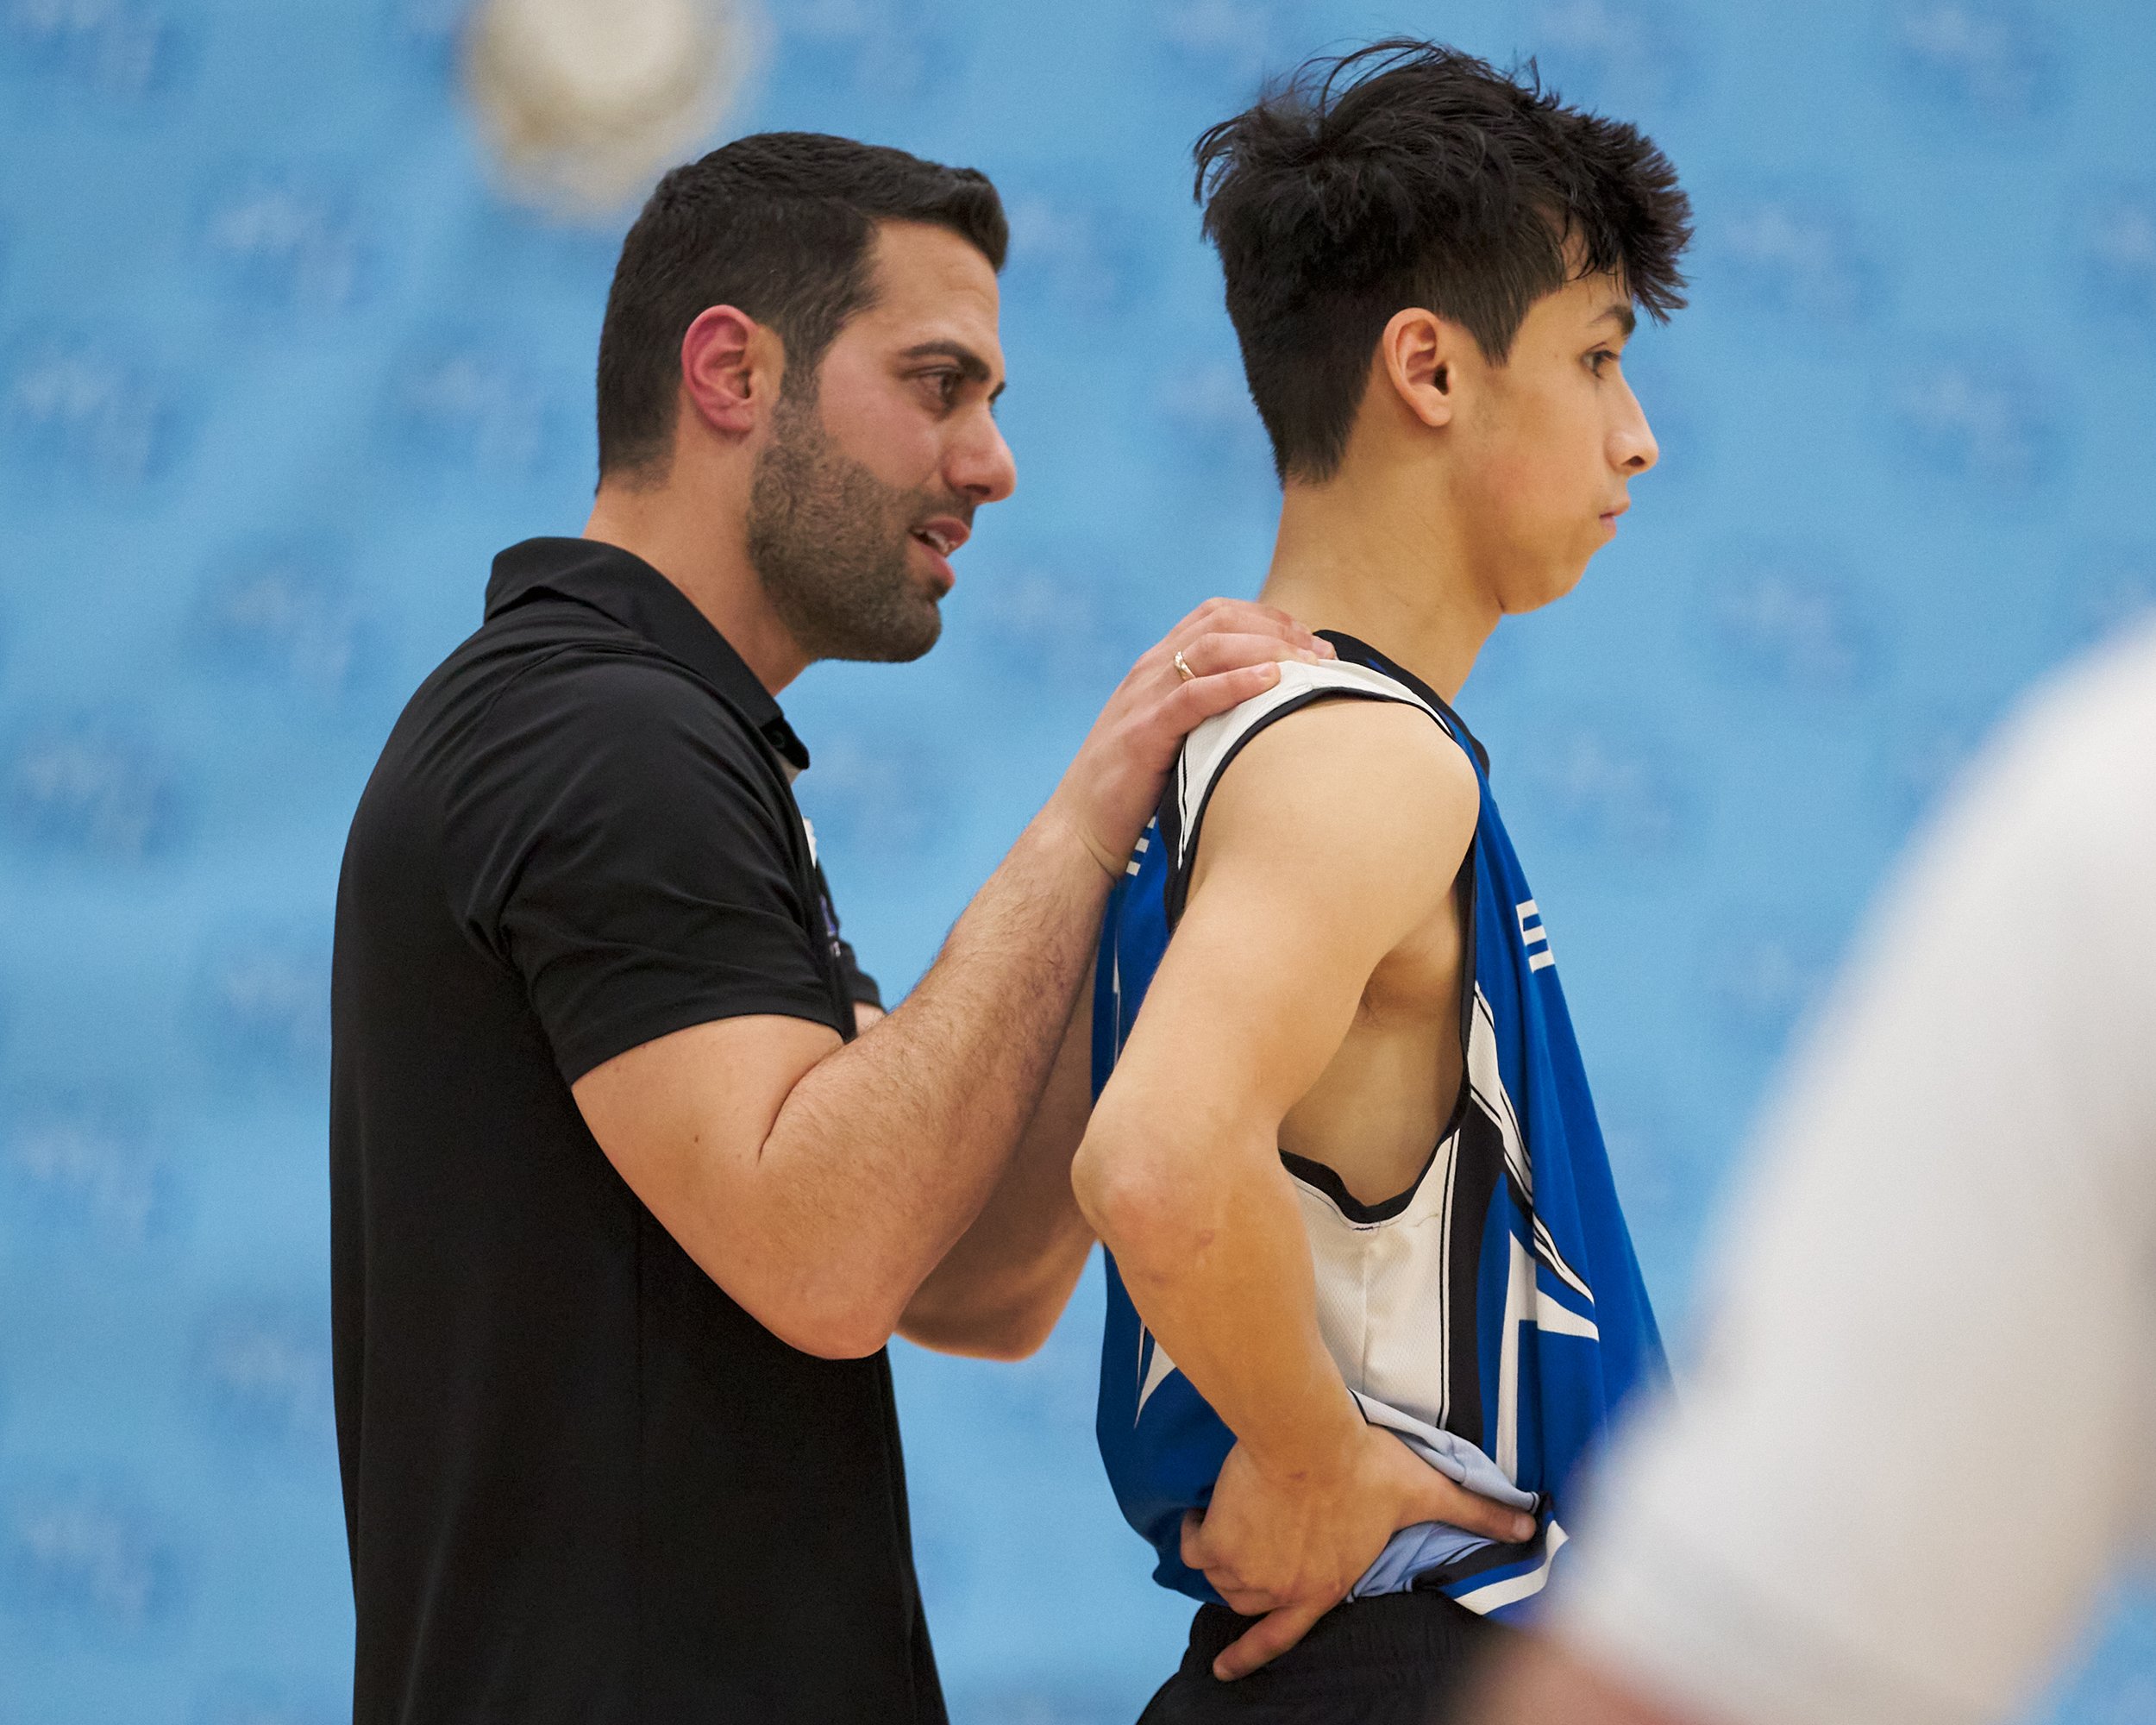  Santa Monica College Corsairs Men's Volleyball Head Coach Liran Zamir rubs Javier Castillo's shoulders during the men's volleyball match against the Moorpark College Raiders on Friday, March 17, 2023, at Moorpark College's Gymnasium in Moorpark, Cal